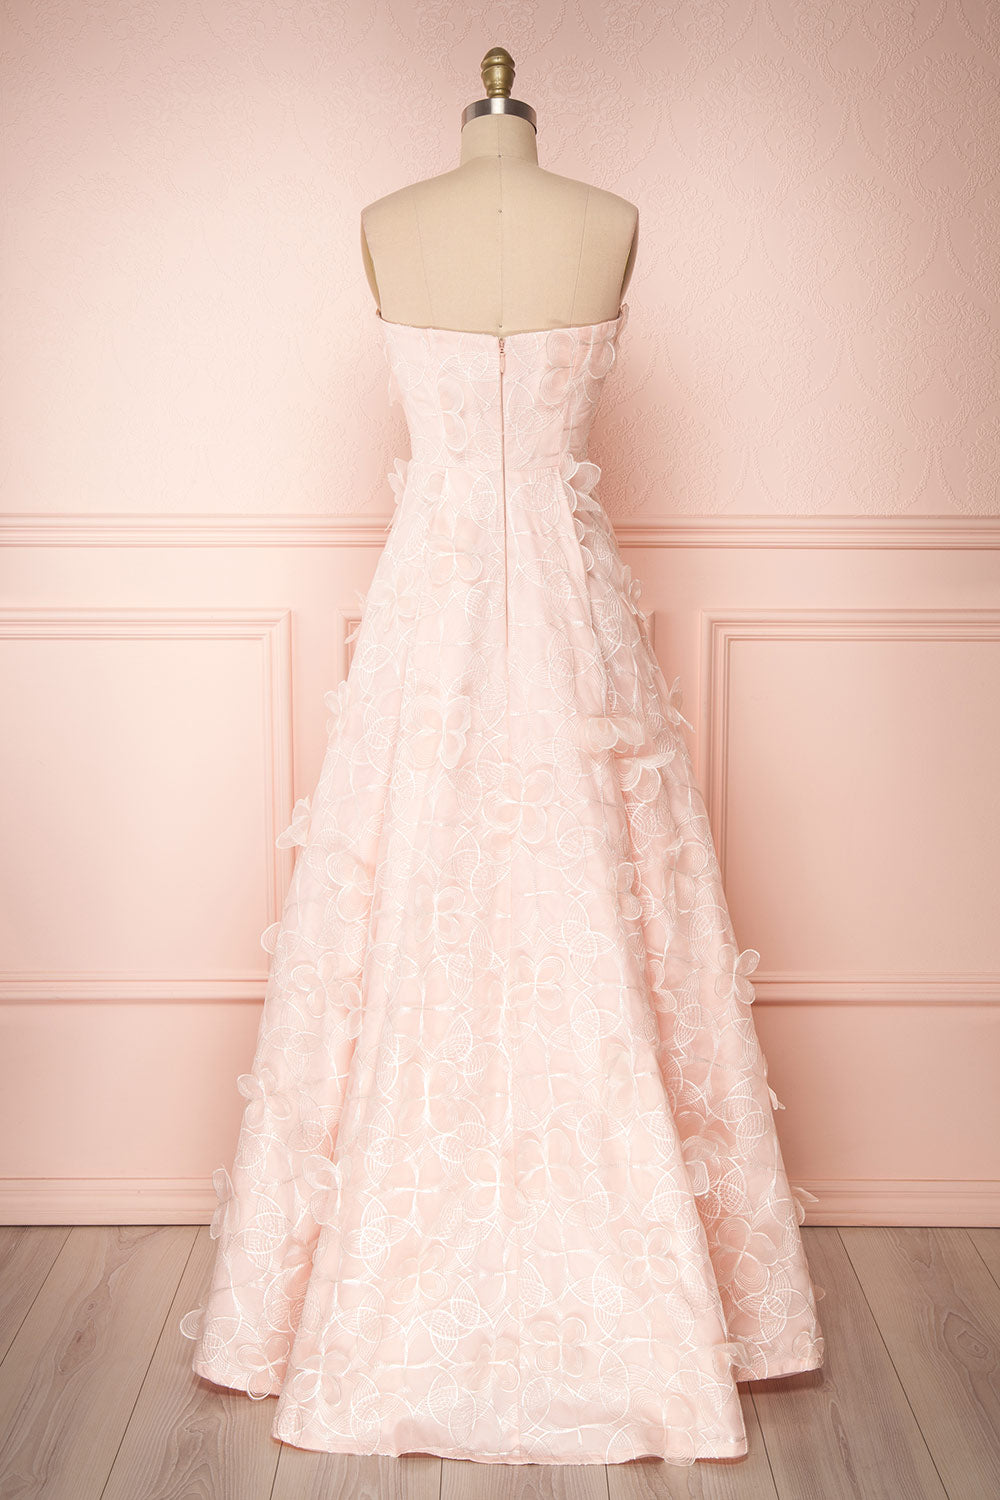 Marichka Pink Floral A-Line Bustier Gown | Boutique 1861 back view 